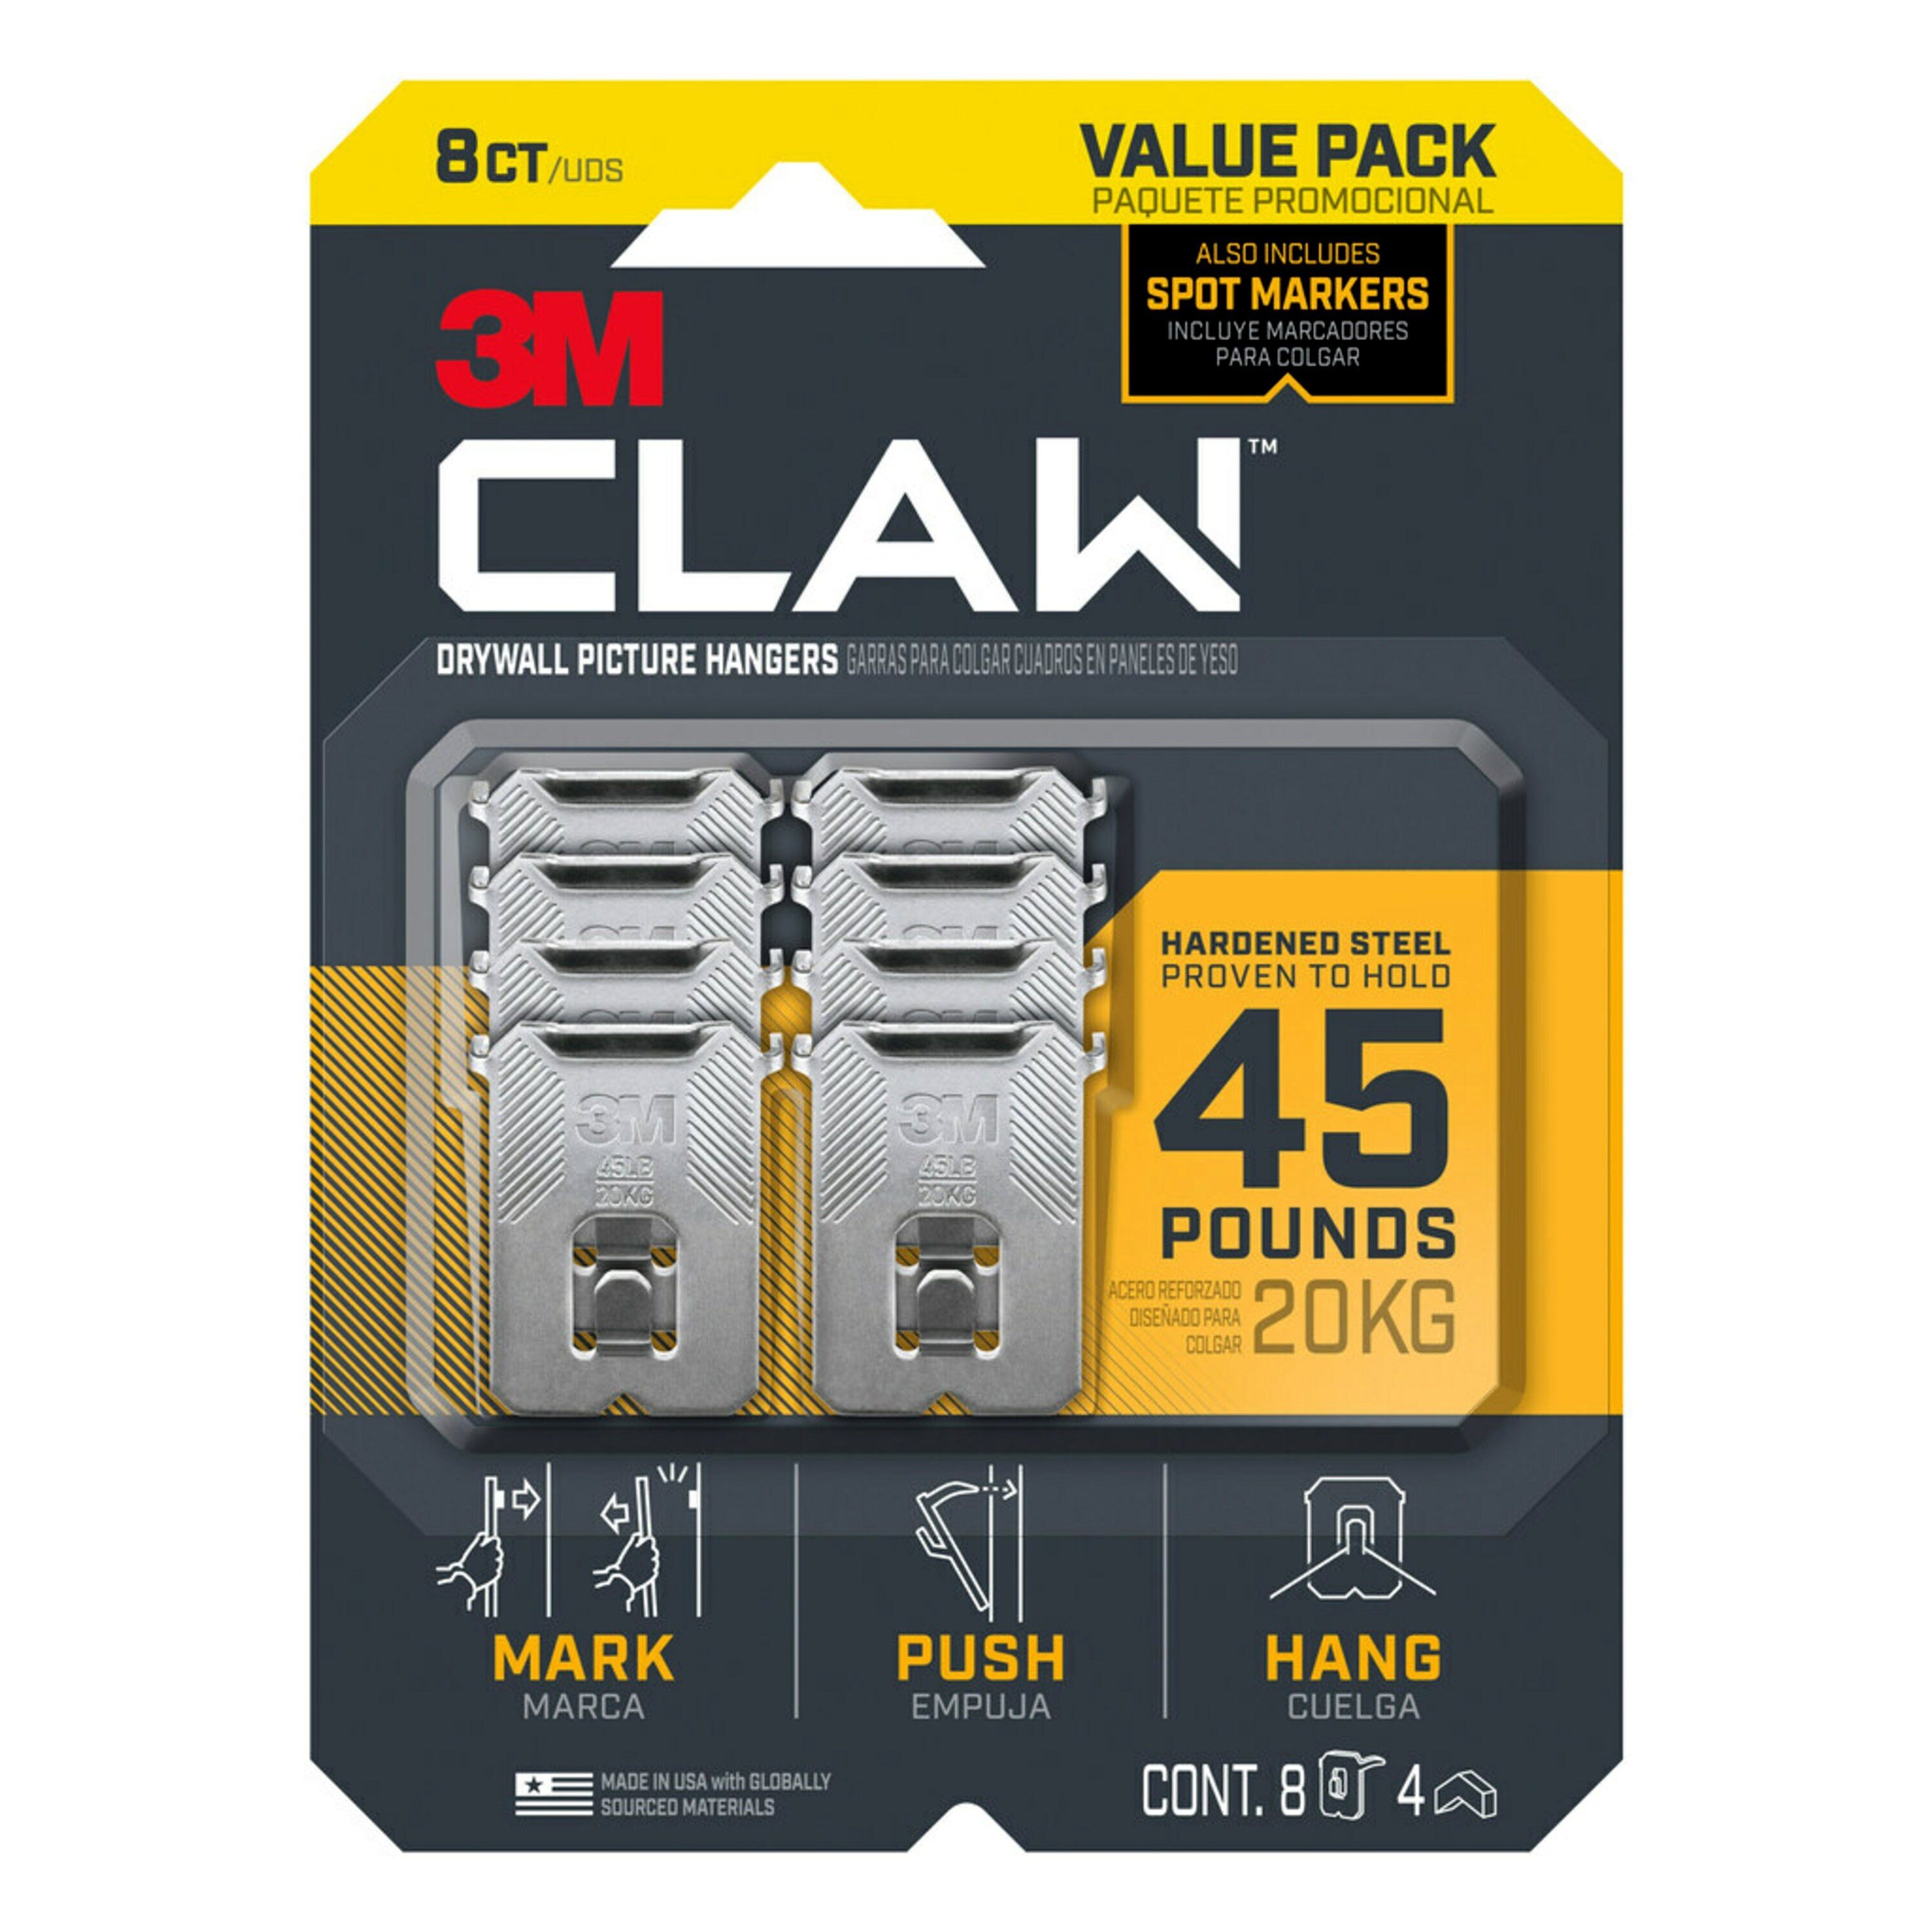 3M 3m Claw Drywall Picture Hangers 25lb with Temporary Spot Markers  3ph25m-10es, 10 Hangers, 5 Markers in the Picture Hangers department at